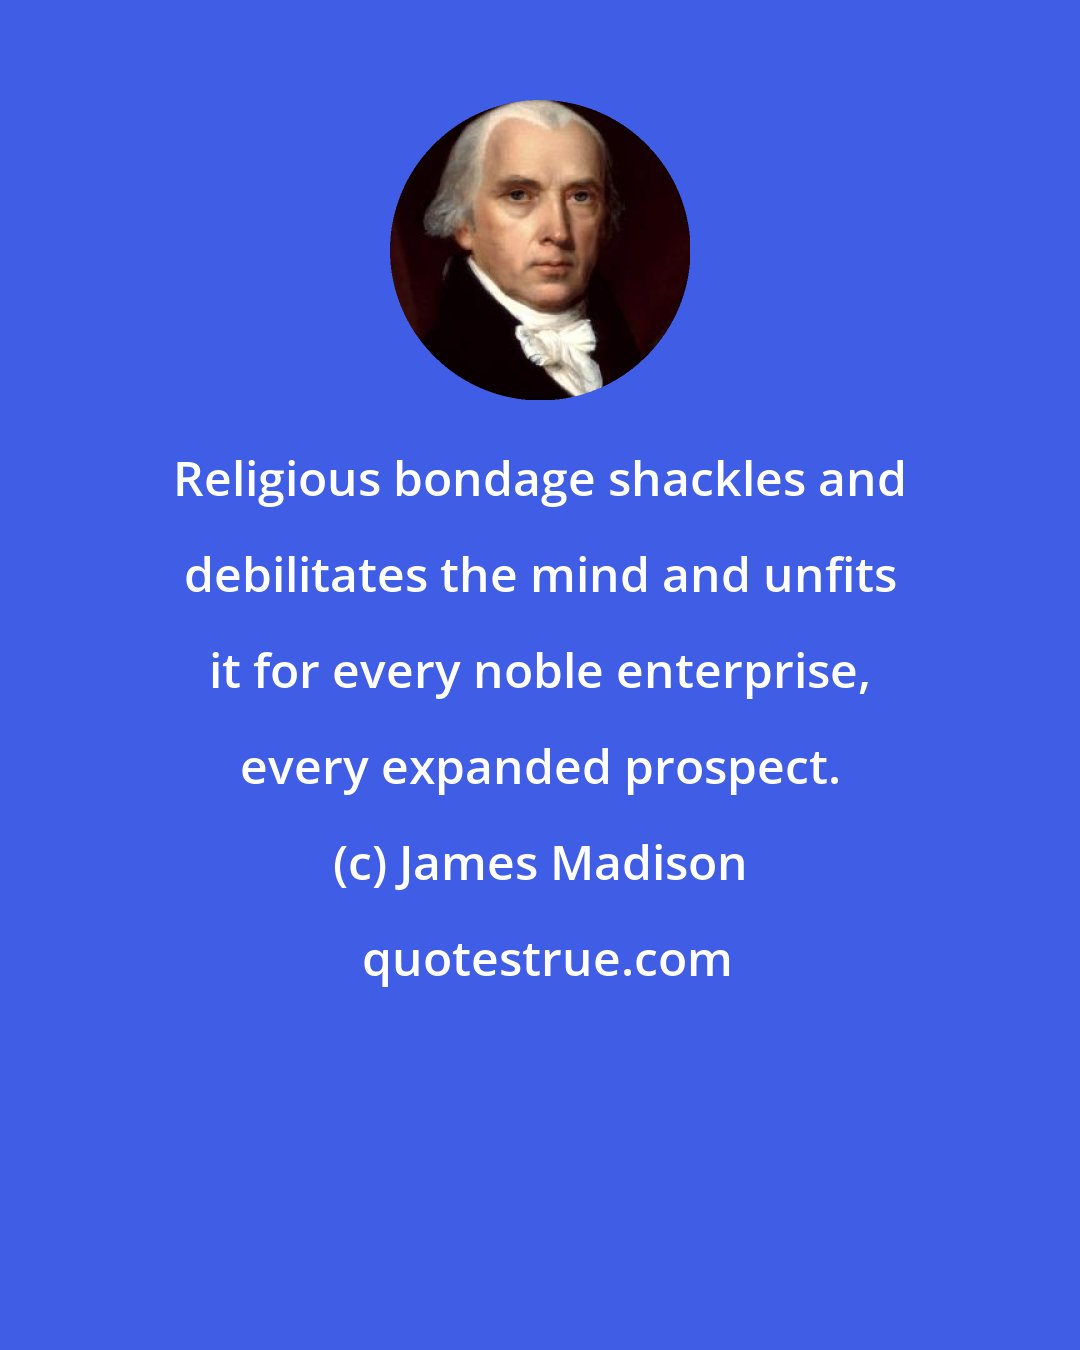 James Madison: Religious bondage shackles and debilitates the mind and unfits it for every noble enterprise, every expanded prospect.